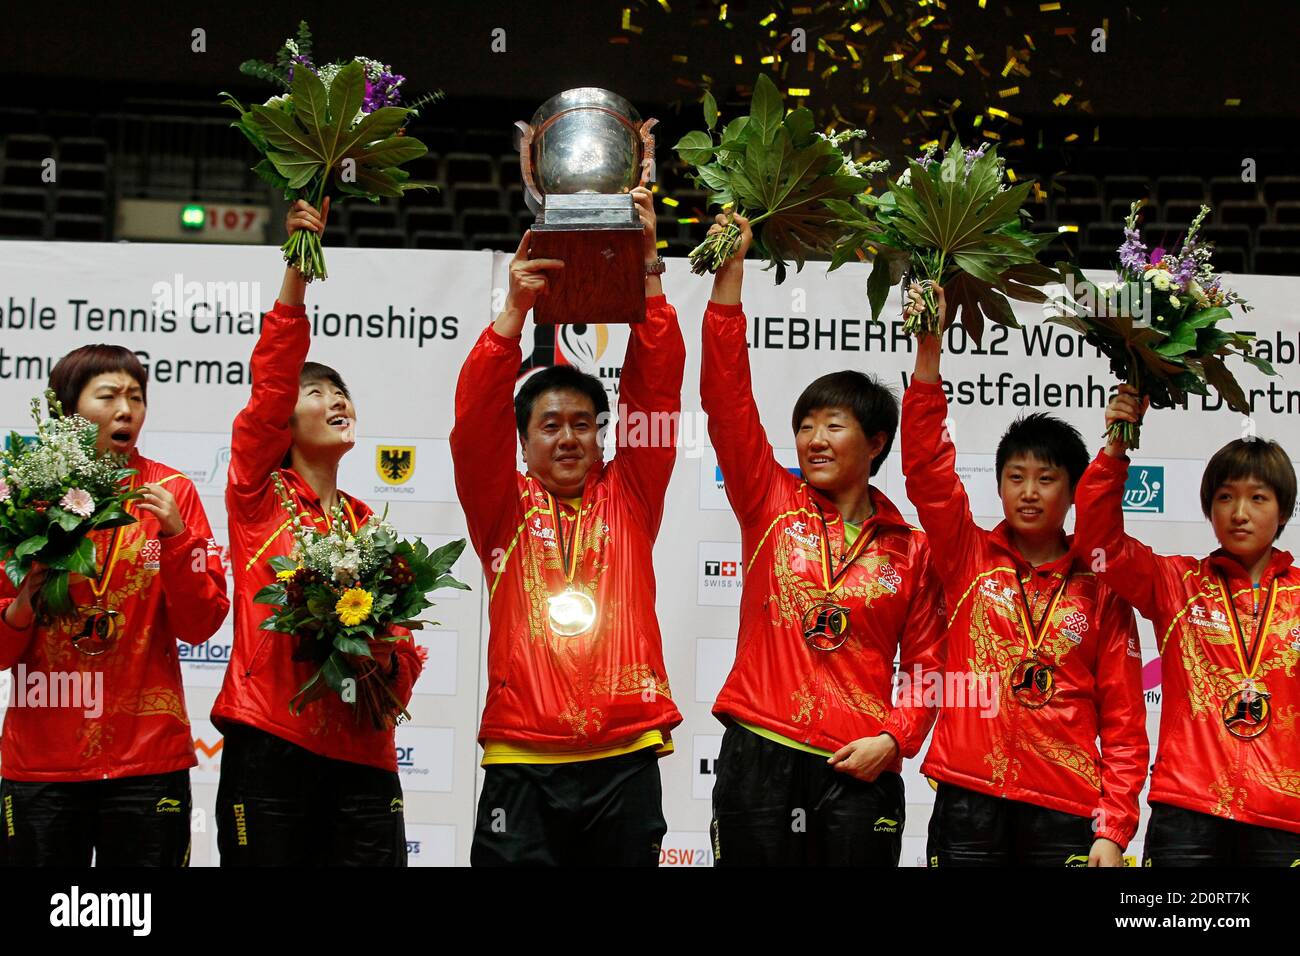 Team China celebrates with the trophy after winning the women's final  against Singapore at the Team Table Tennis Championships in Dortmund April  1, 2012. China's team members are (L-R) Li Xiaoxia, Ding